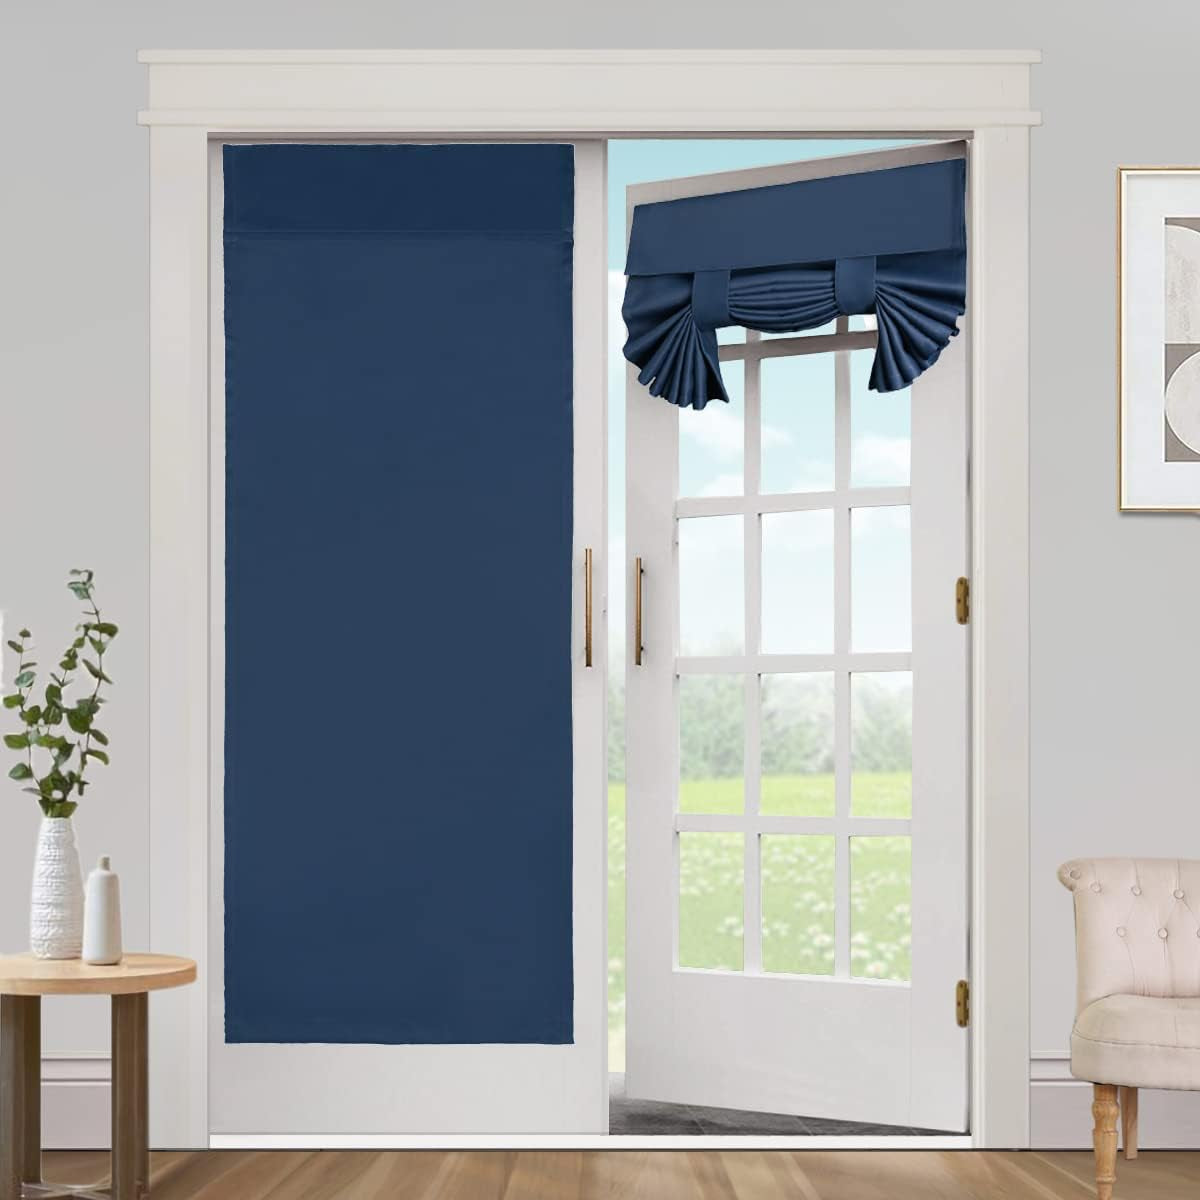 Blackout Curtains for French Doors - Thermal Insulated Tricia Door Window Curtain for Patio Door, Self Stick Tie up Shade Energy Efficient Double Door Blind, 26 X 68 Inches, 1 Panel, Sage  L.VICTEX Navy 2 